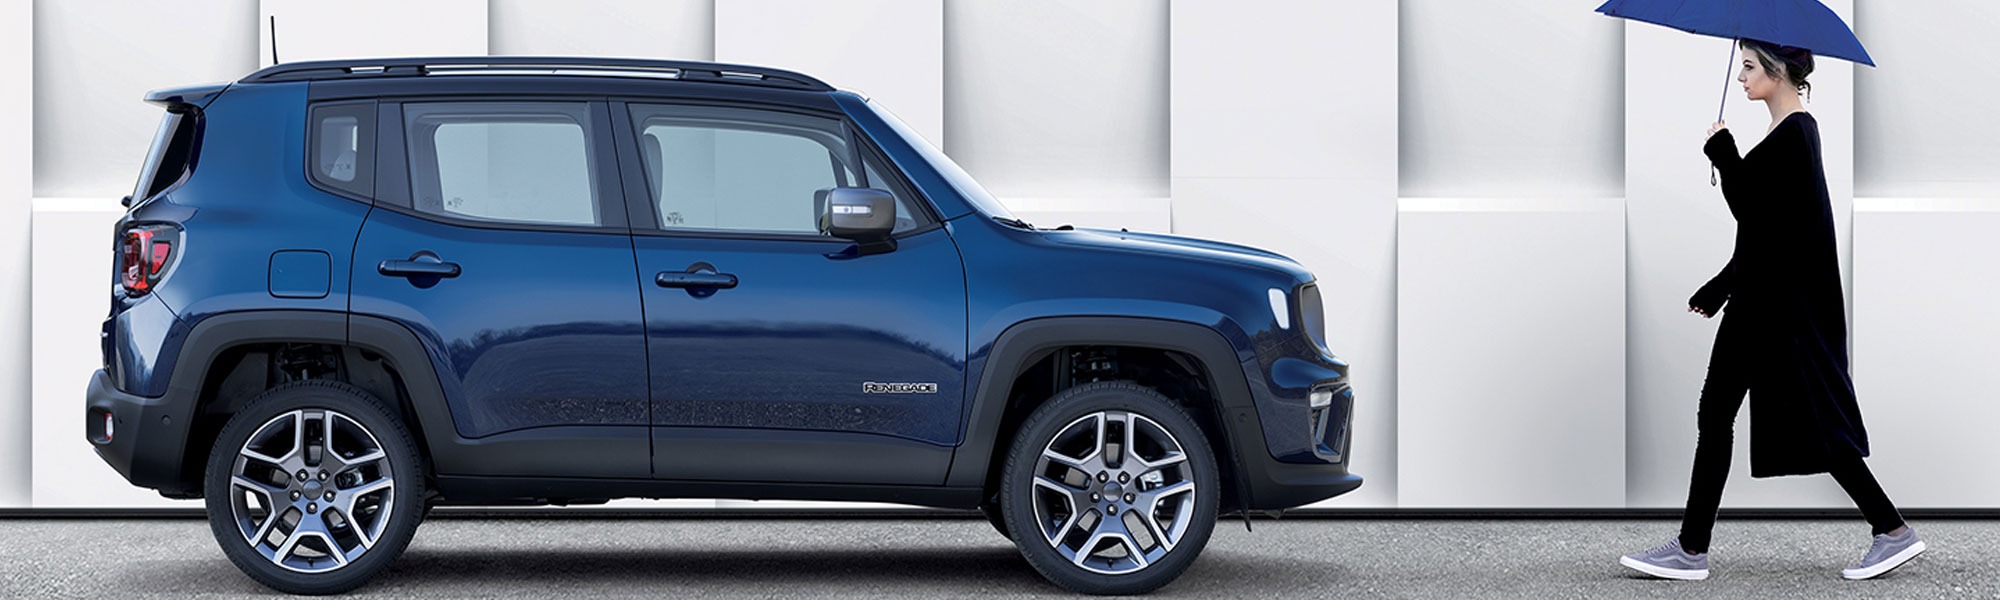 jeep renegade Banner